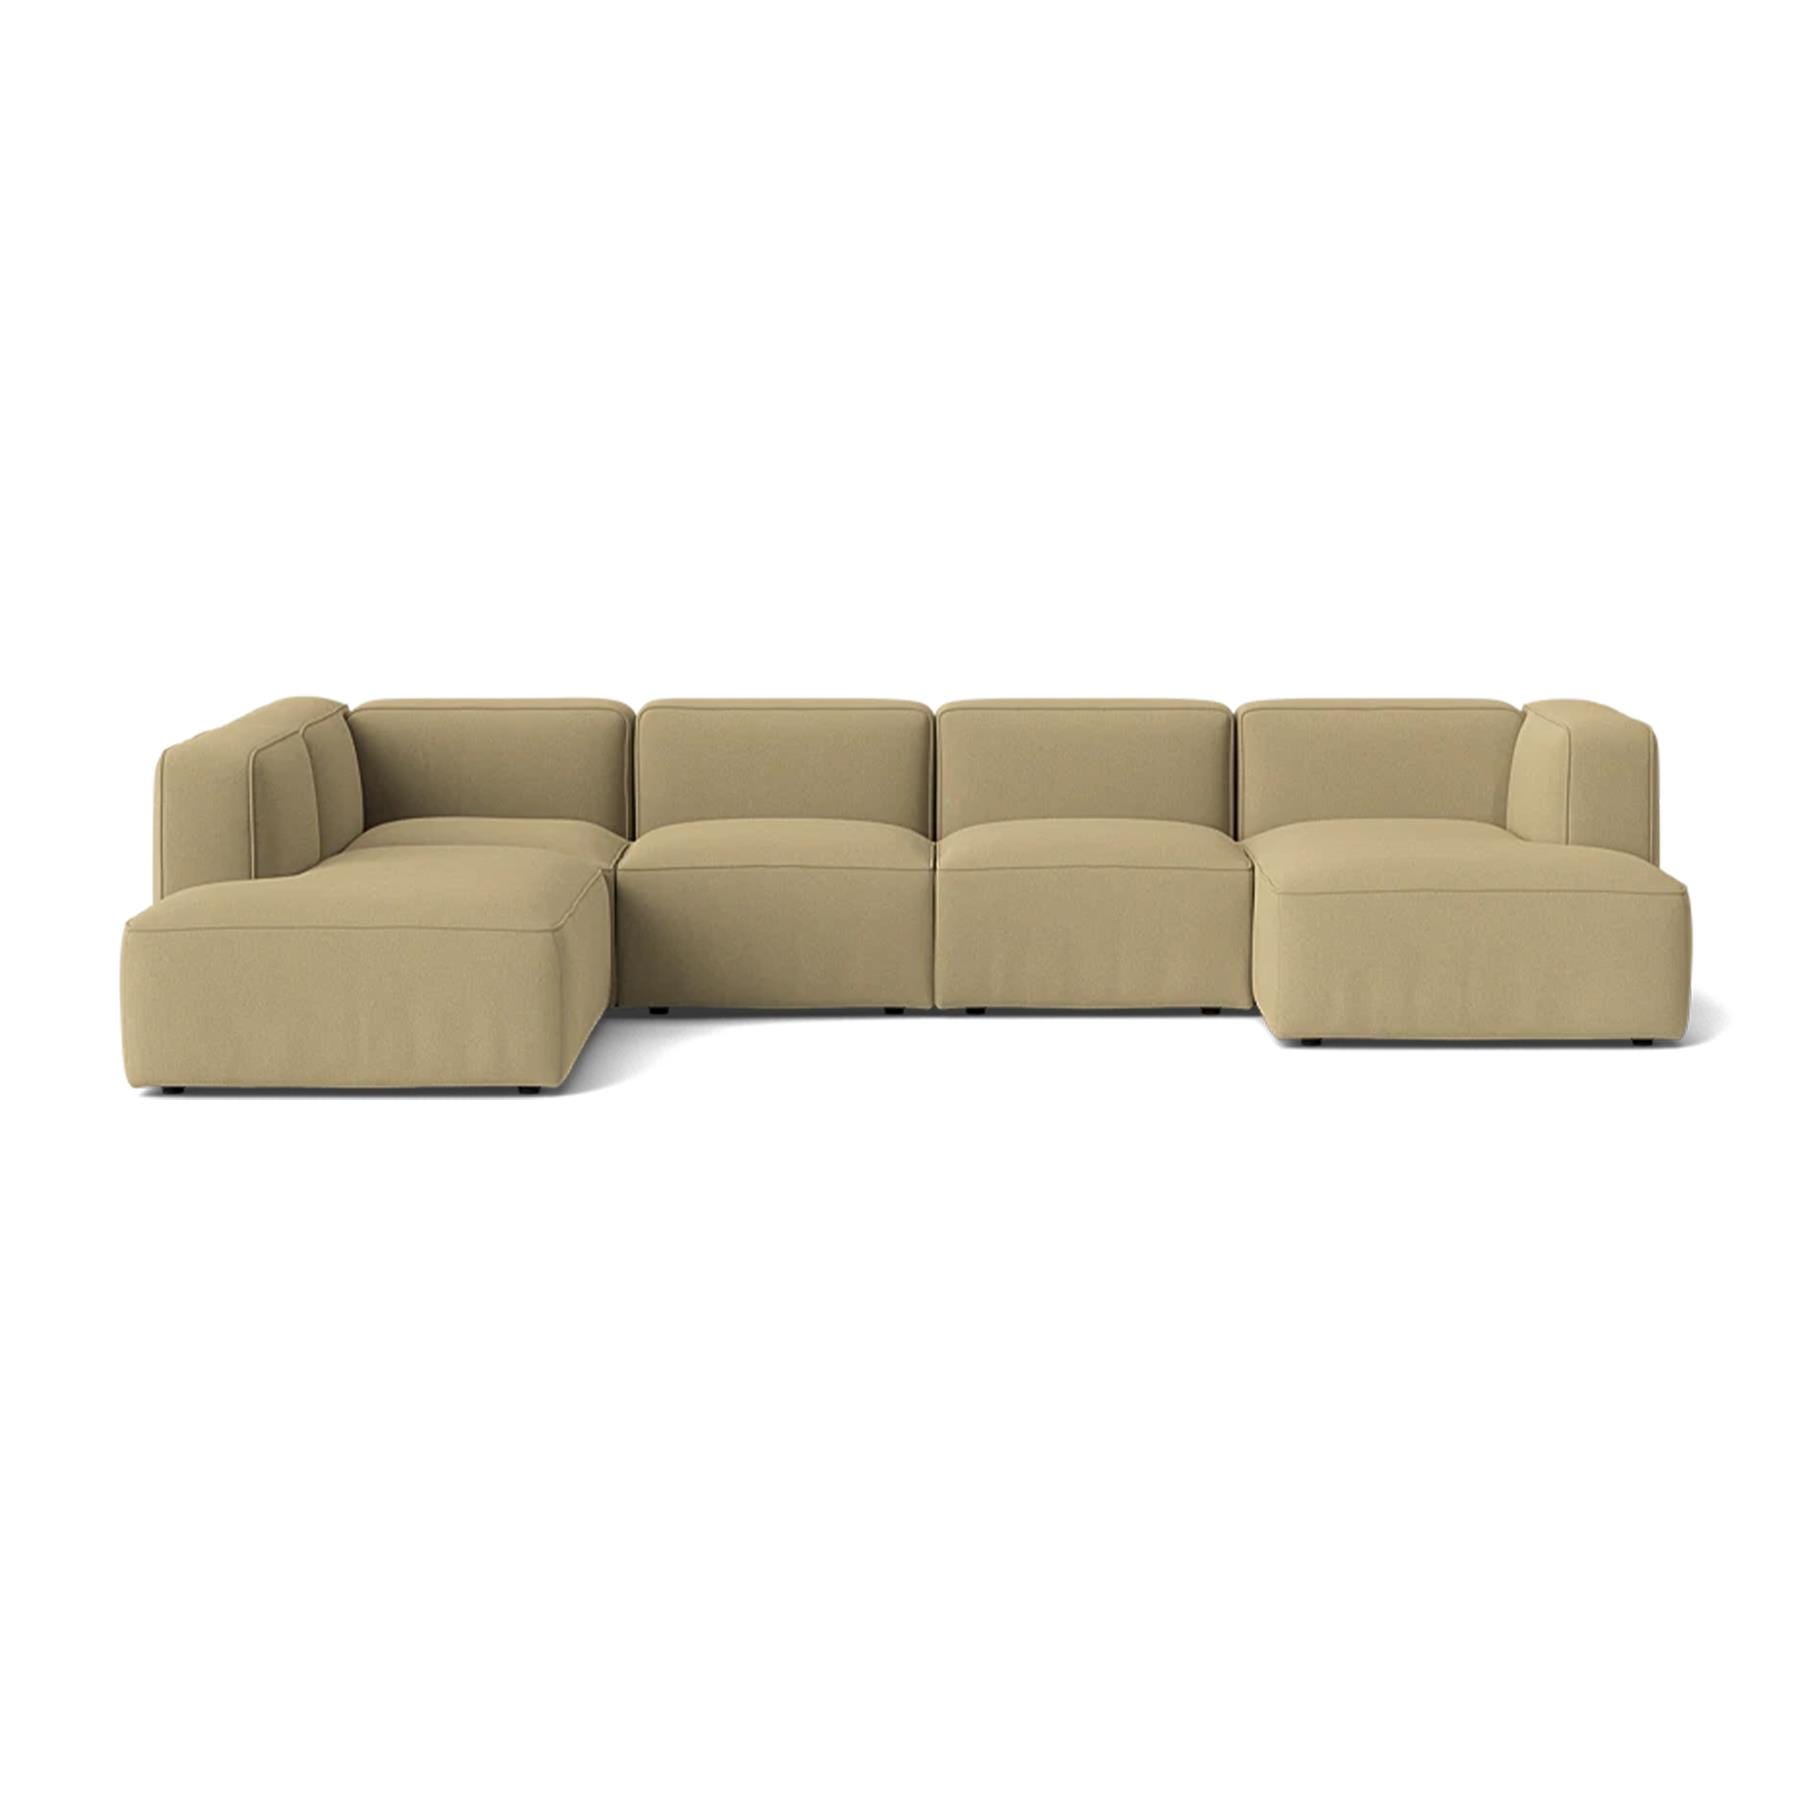 Make Nordic Basecamp Family Sofa Fiord 422 Right Yellow Designer Furniture From Holloways Of Ludlow